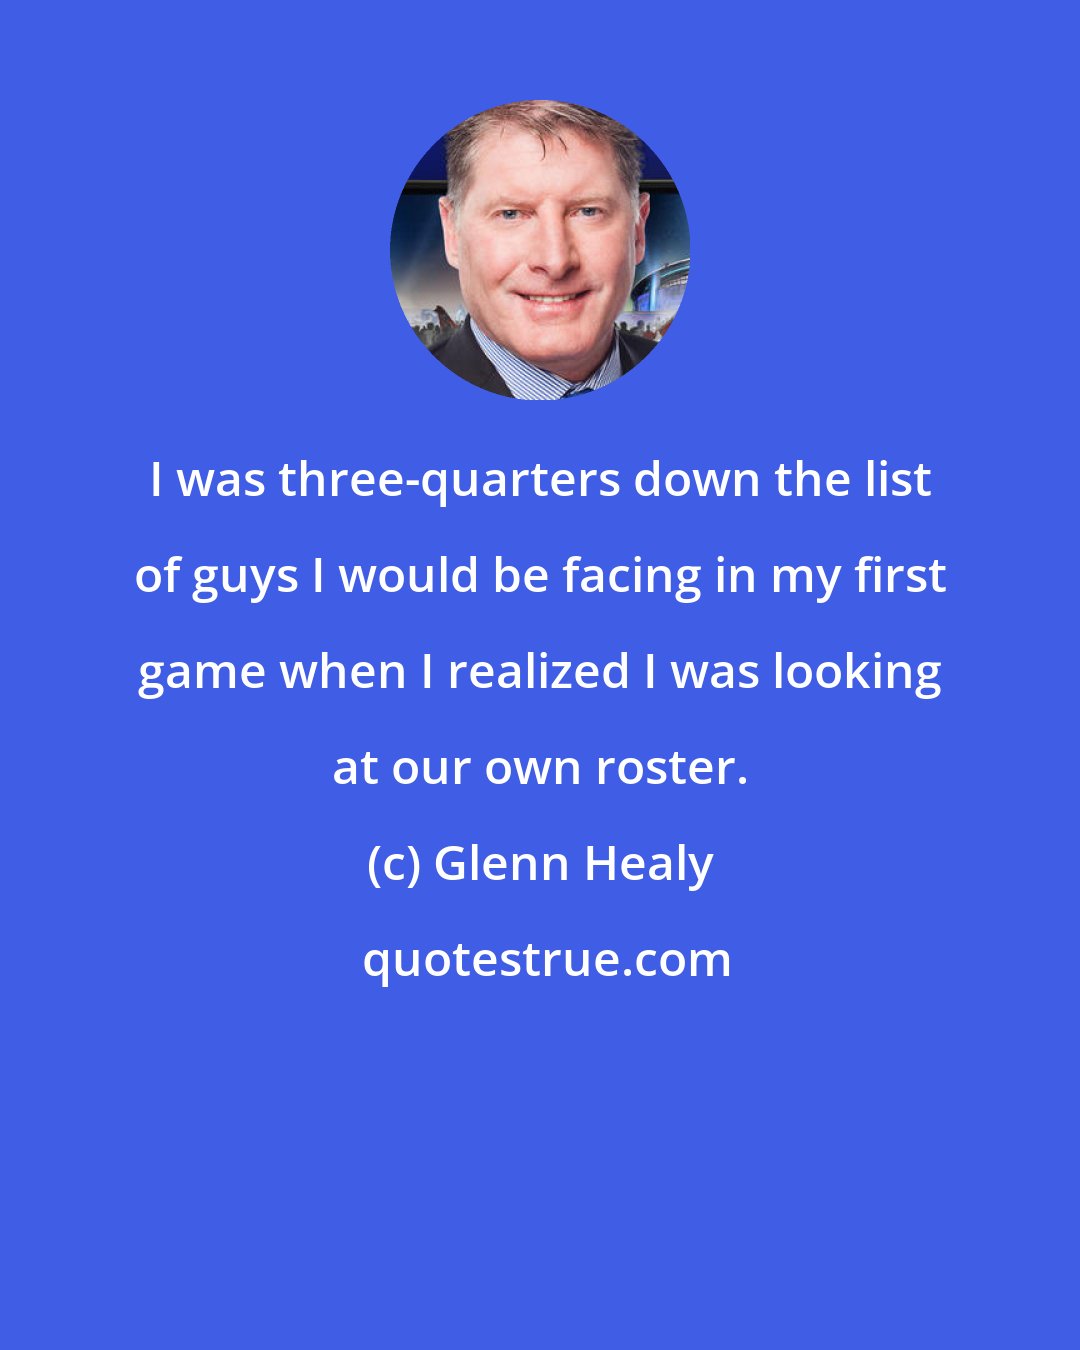 Glenn Healy: I was three-quarters down the list of guys I would be facing in my first game when I realized I was looking at our own roster.